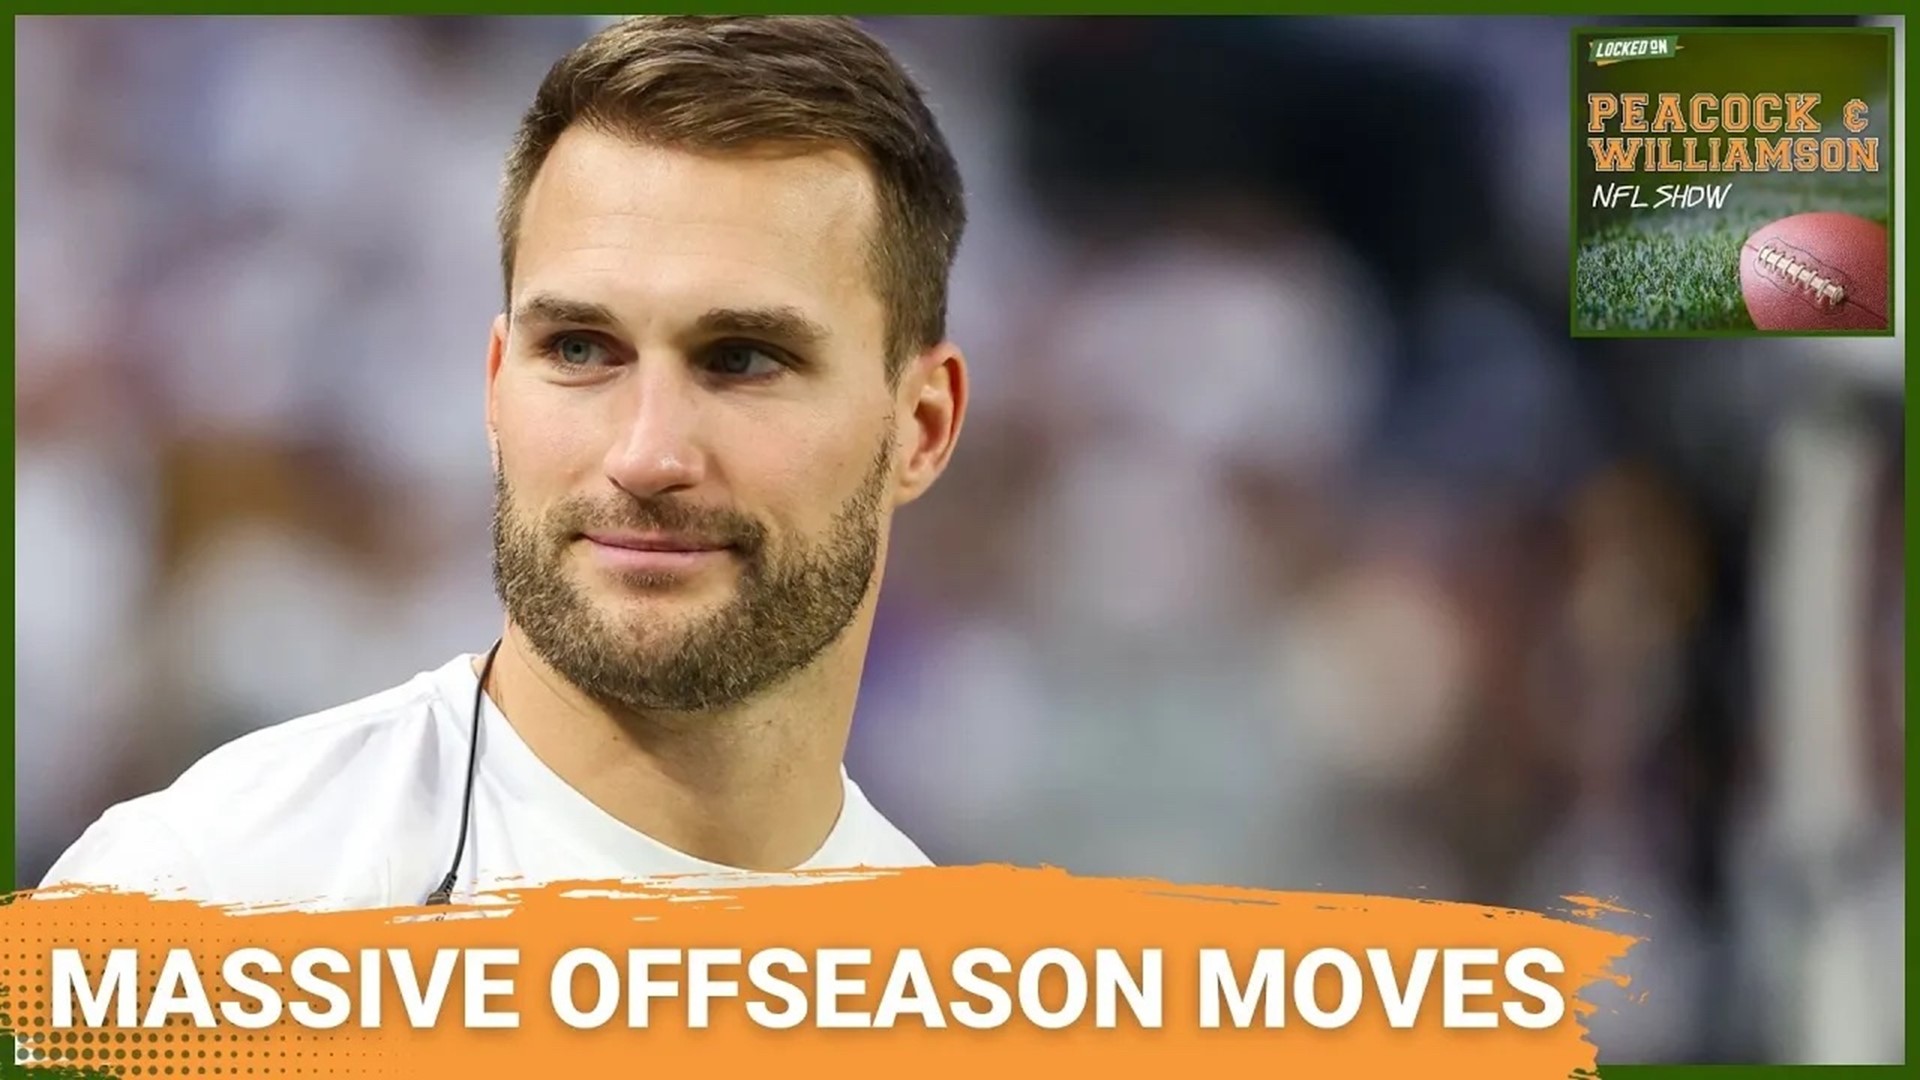 Kirk Cousins to the Falcons, Christian Wilkins to the Raiders, Brian Burns traded to the Giants, Saquon Barkley to the Eagles, Derrick Henry to the Ravens & more.